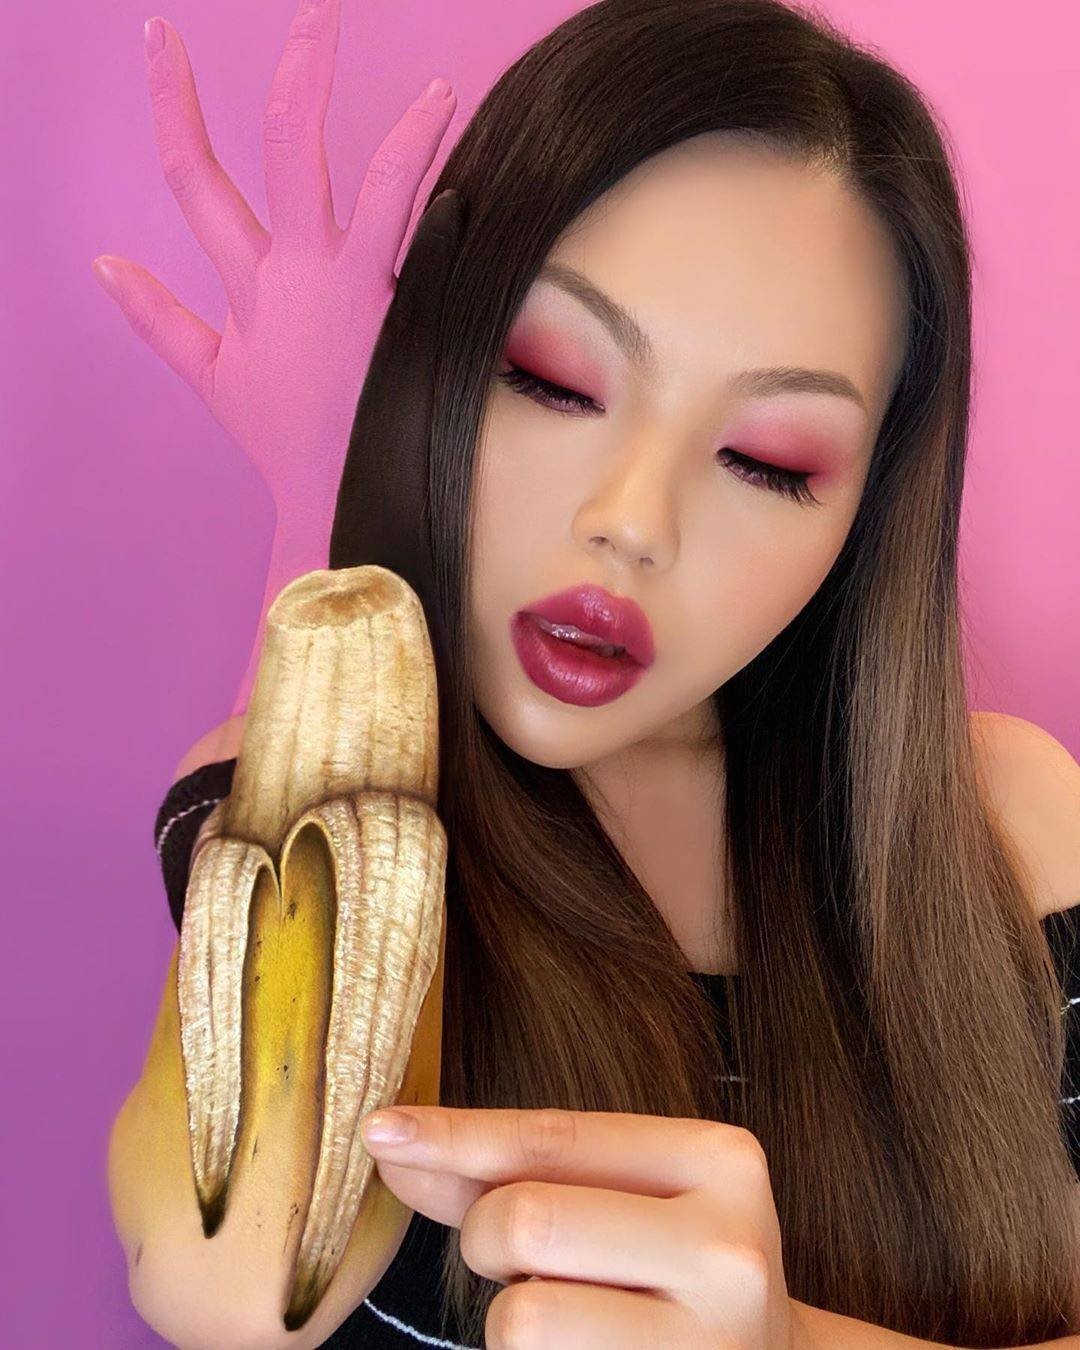 NYX Professional Makeup - Attn: Beauties! You don't wanna miss this! 📣 We'll be hosting a live ILLUSION MASTERCLASS next week with the illusion queen herself, Mimi Choi! 👑🎨 Join us live on Tuesday at...